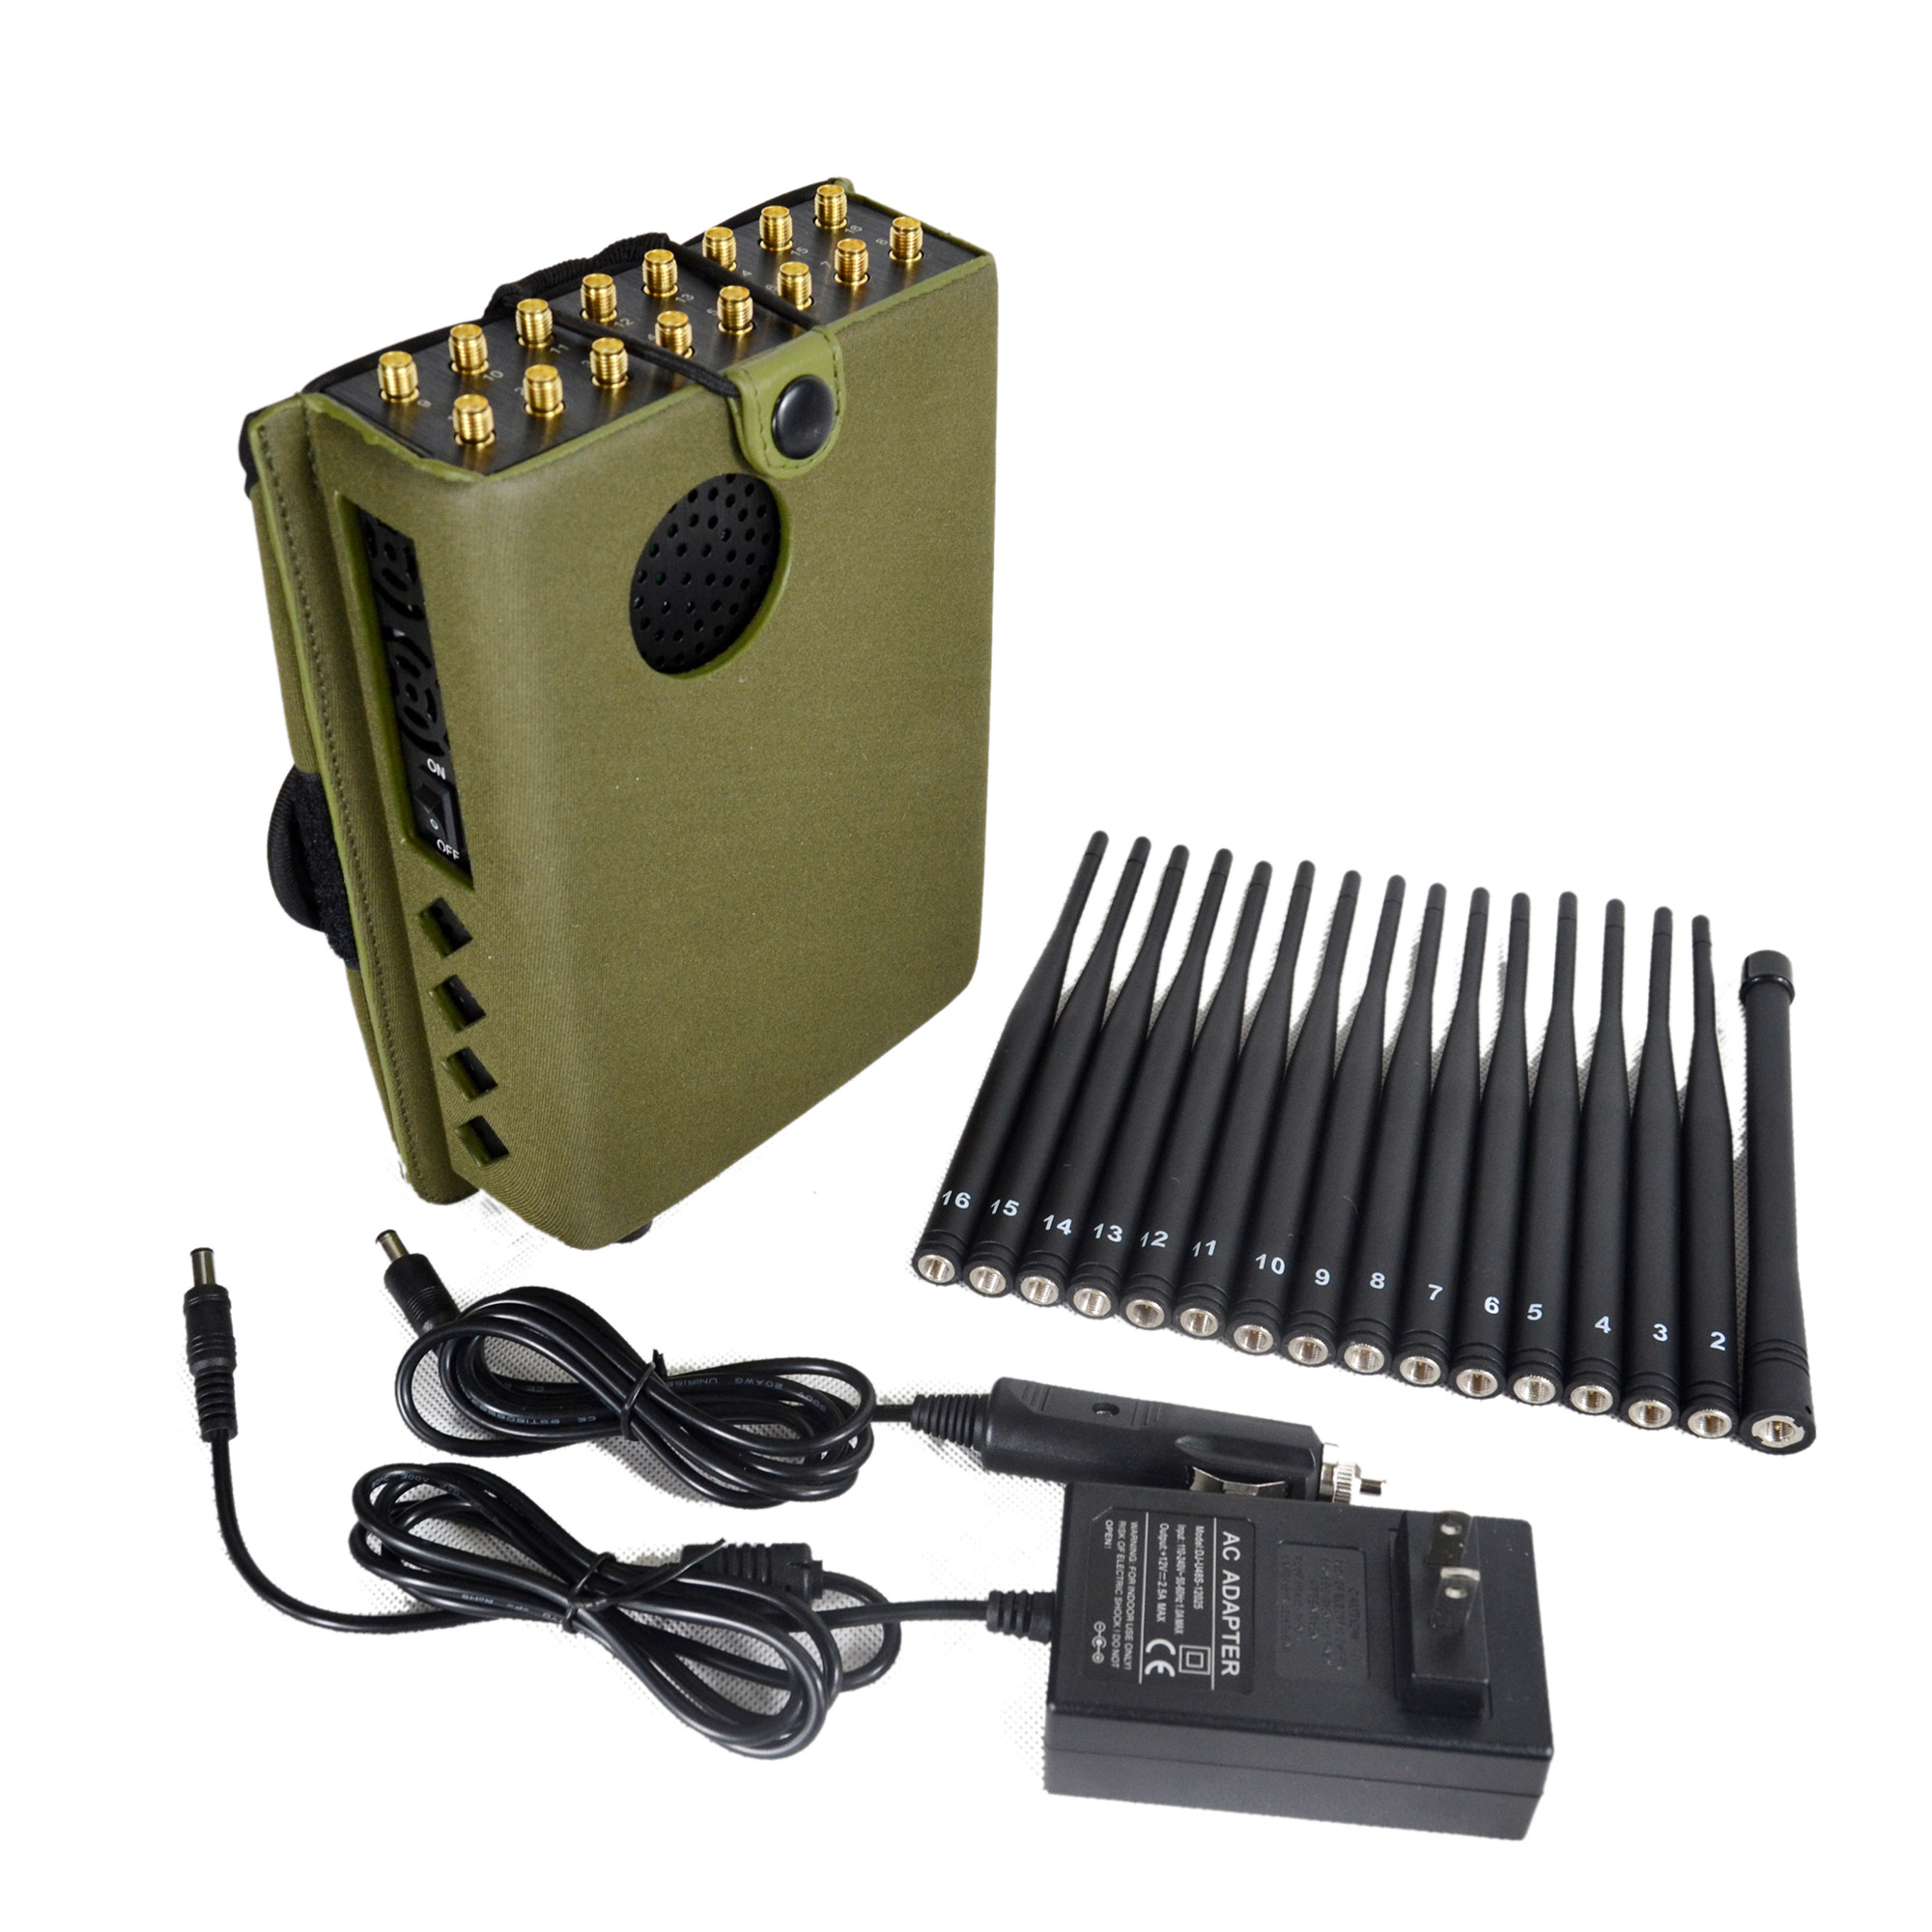 2020 16 Watt New Handheld 16 Bands Cell Phone Jammer With Nylon Cover ...